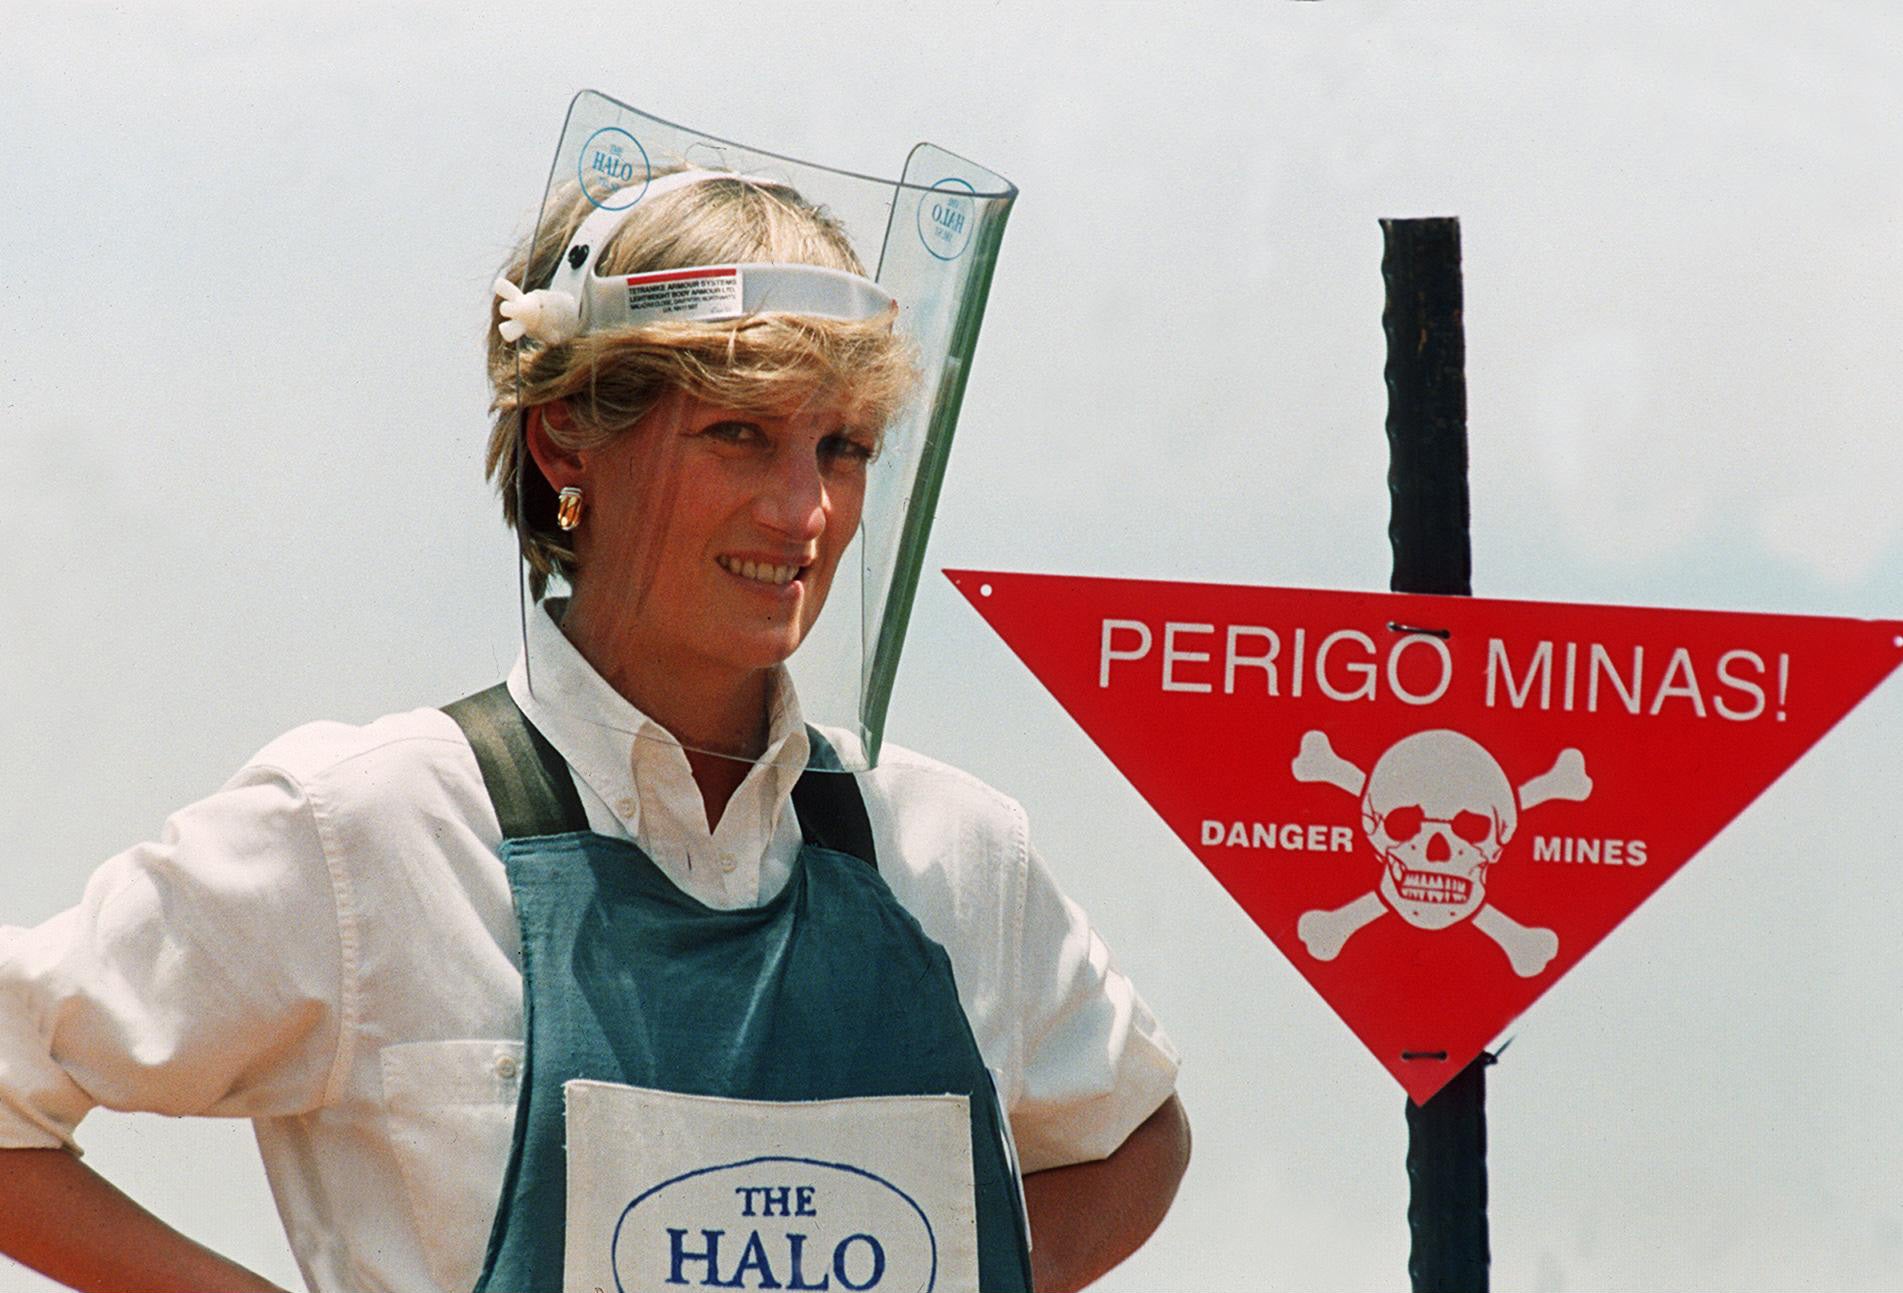 The Princess made history in January of 1997, when she walked across a minefield in Huambo in central Angola.